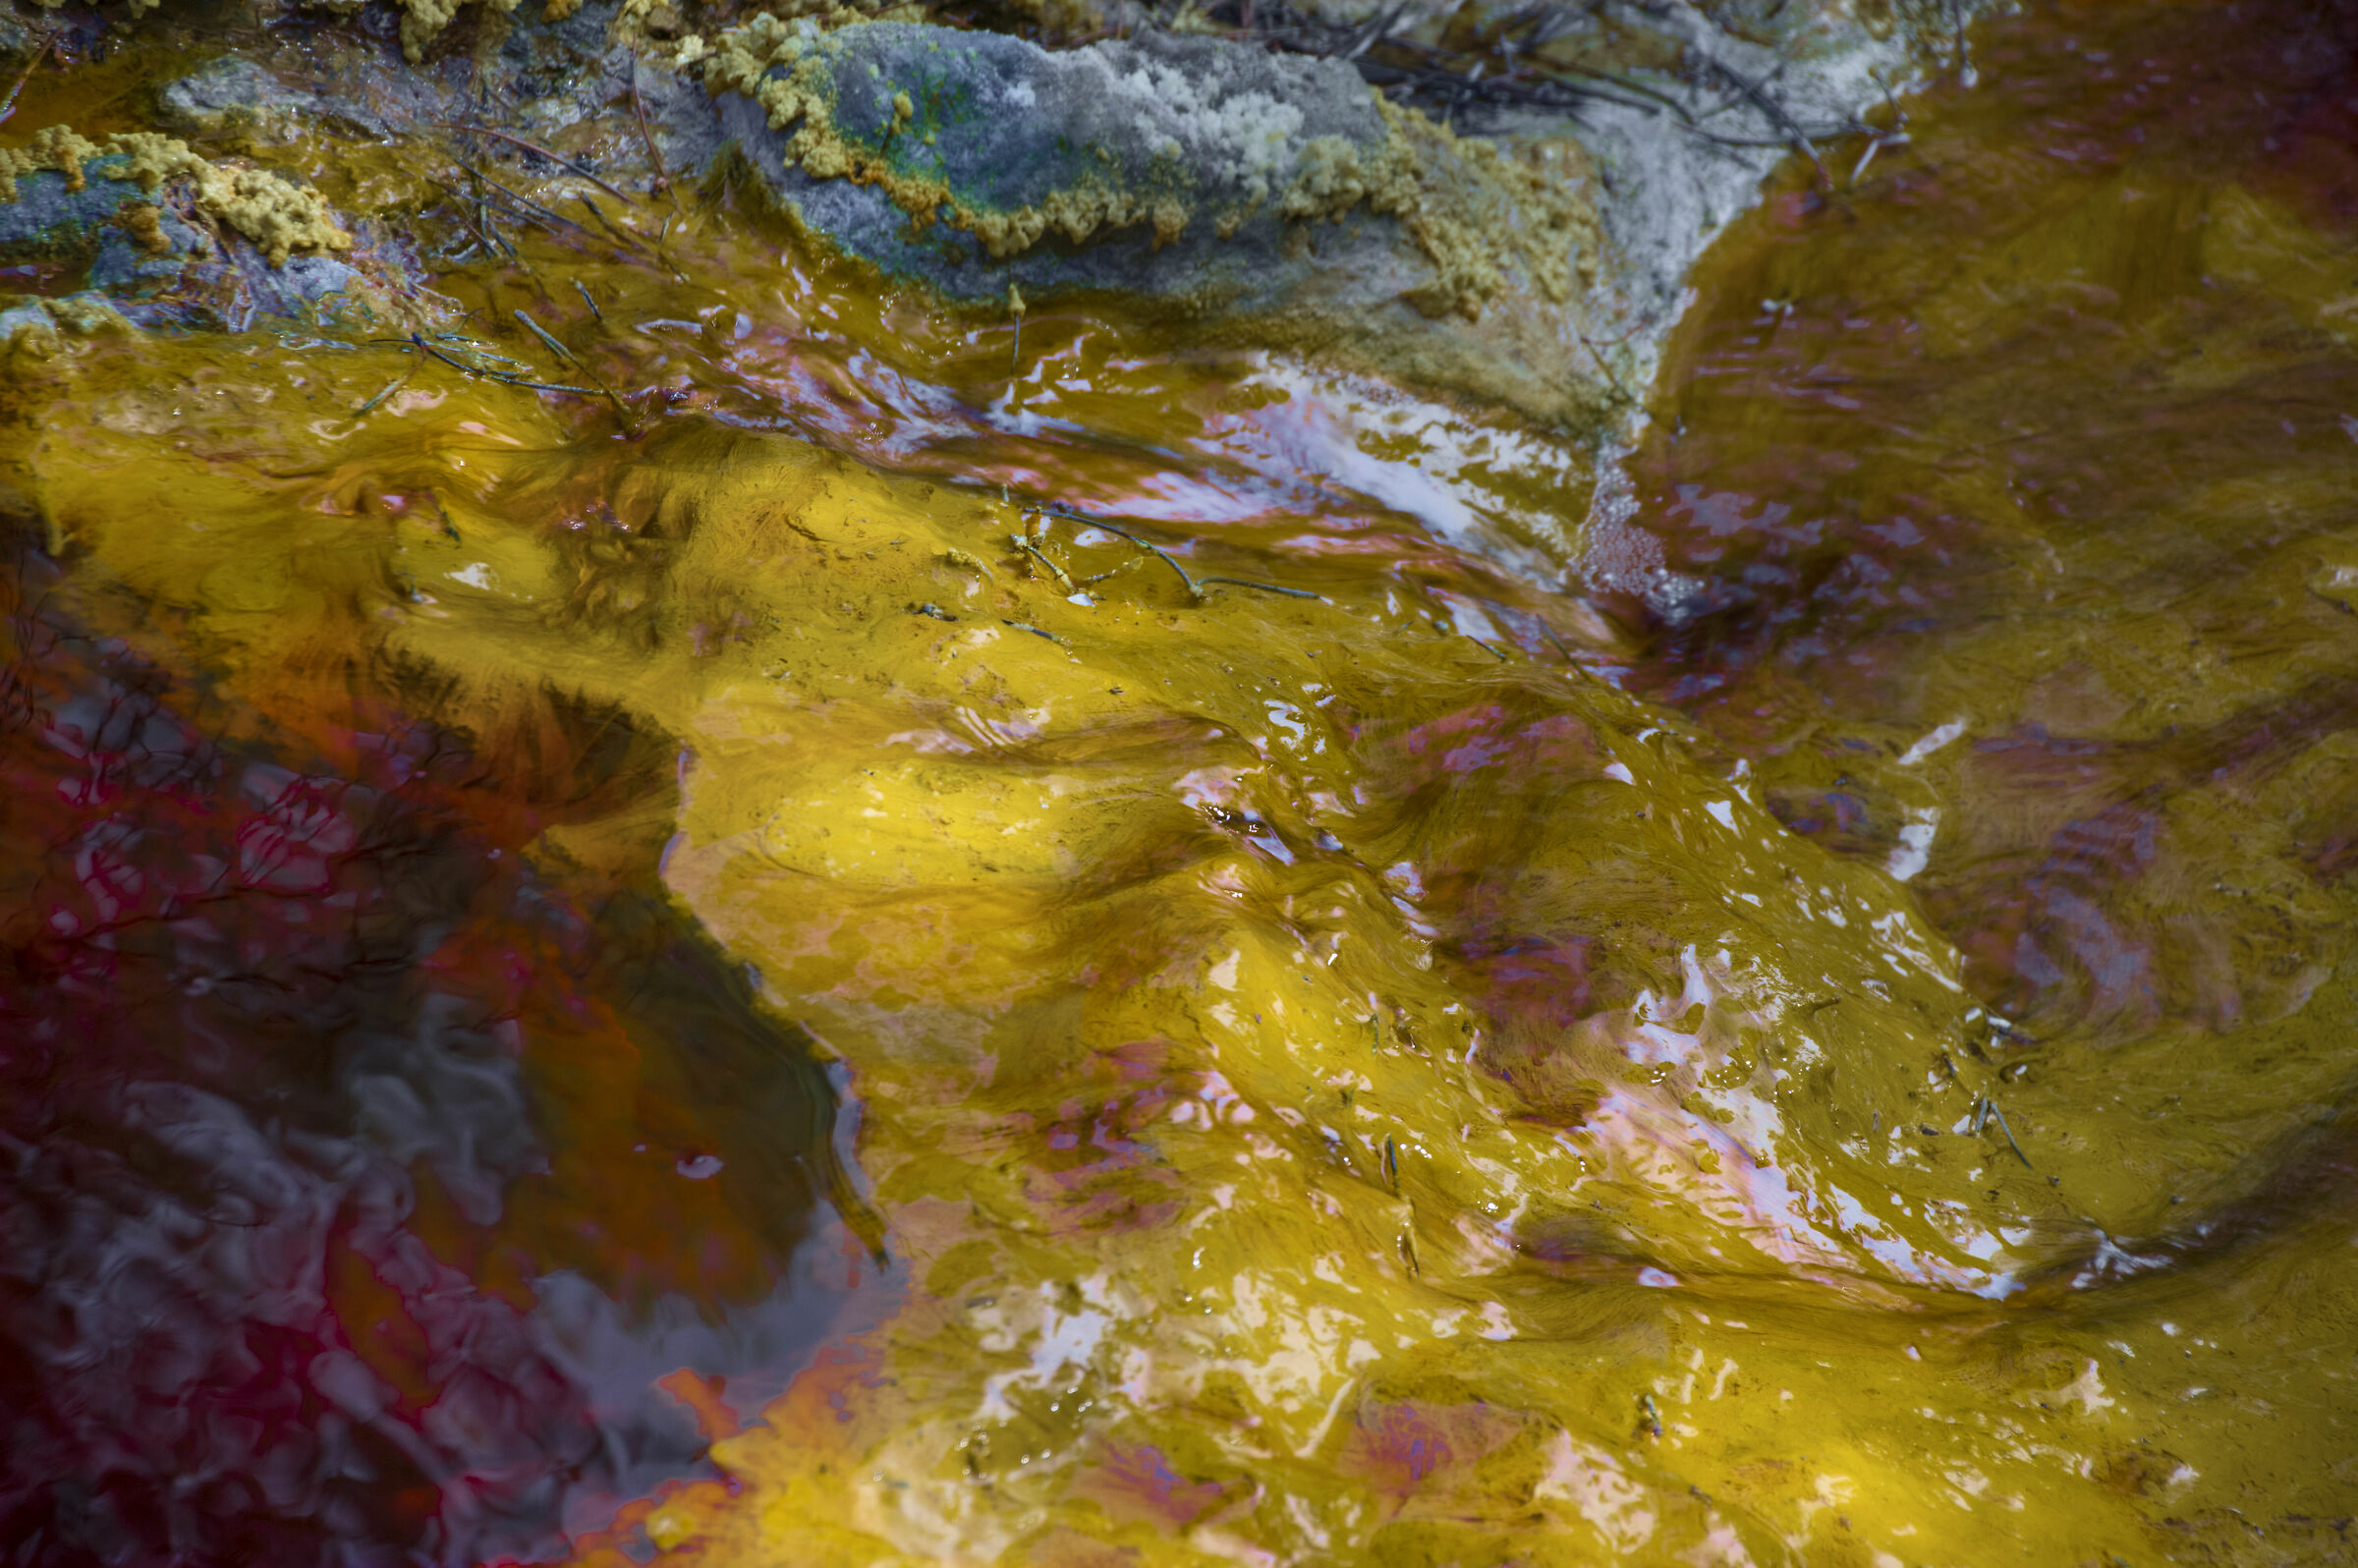 Crystal Water and Motion - Rio Tinto...